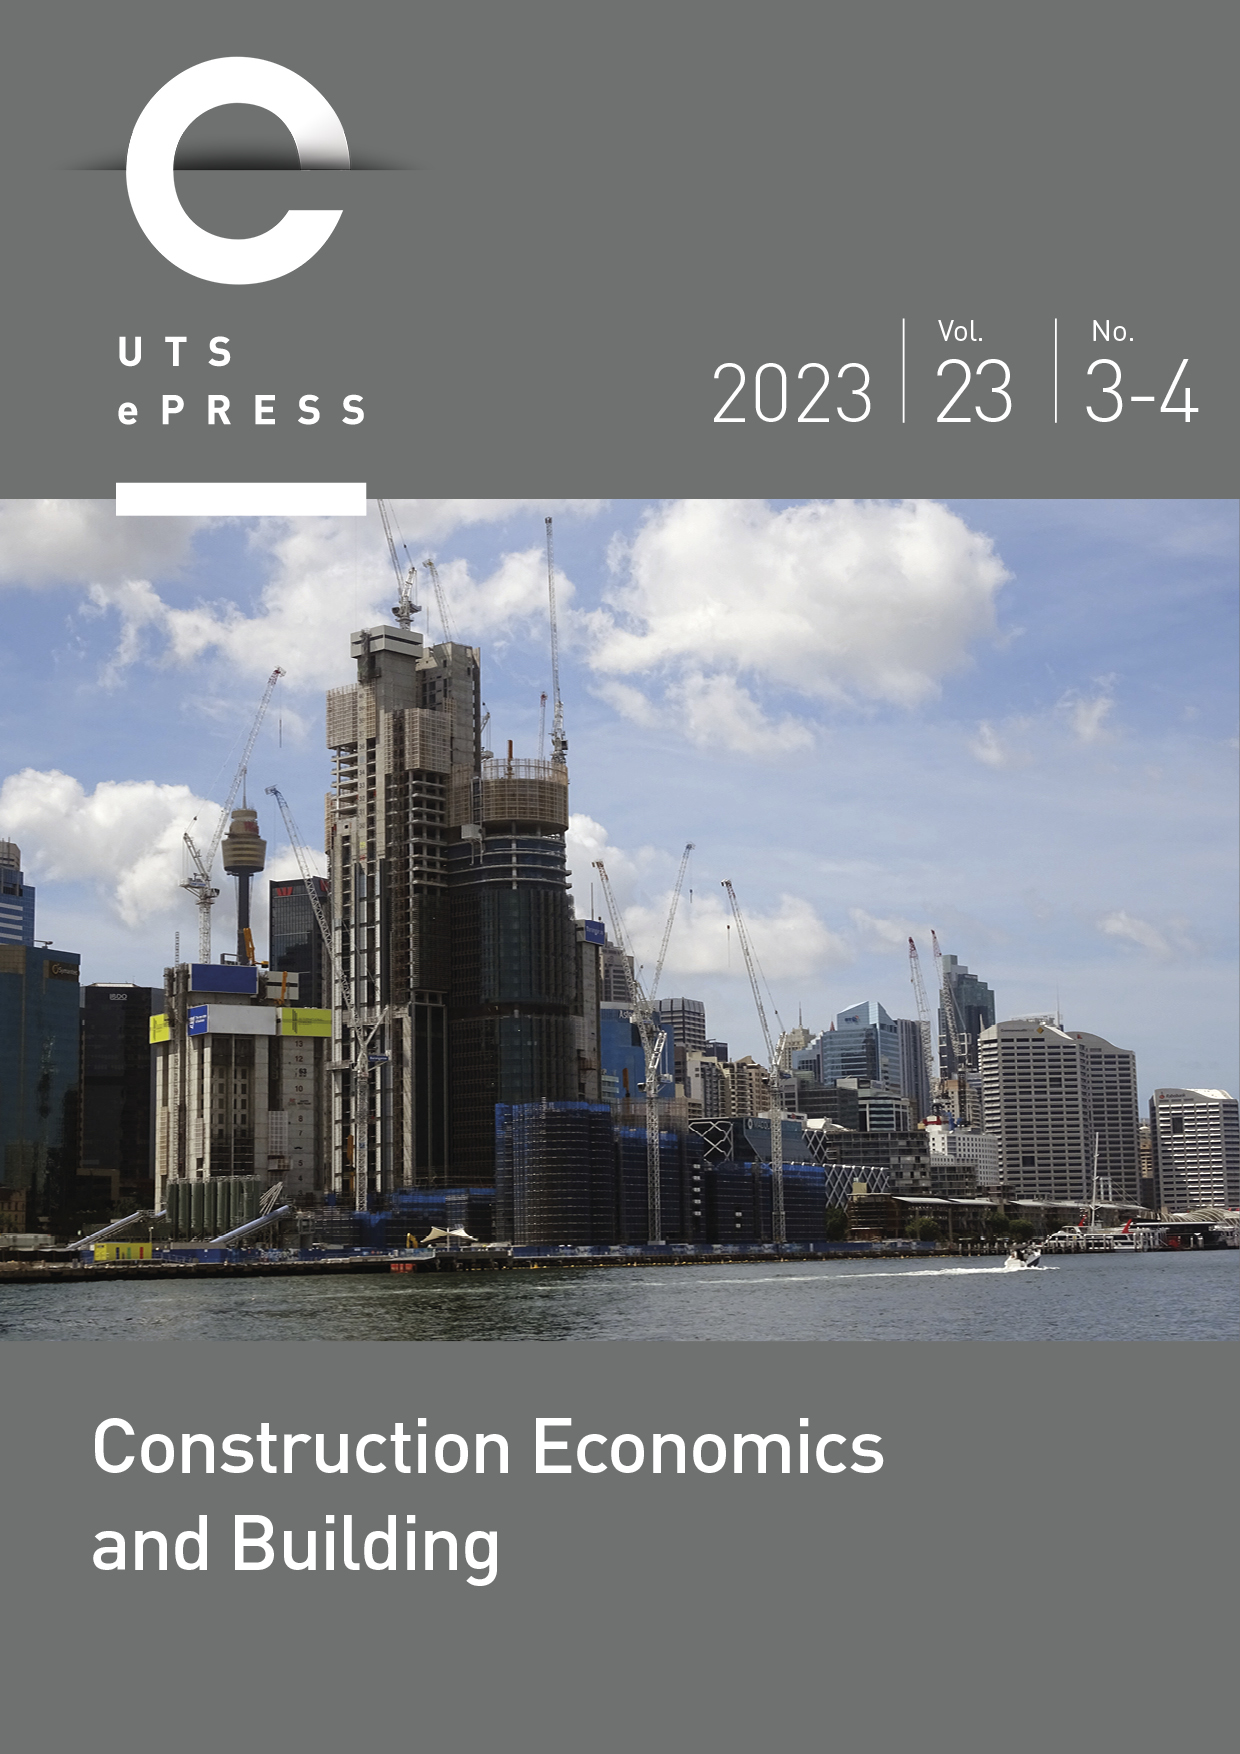 "Construction Economics and Building" 2023 Volume 23 Number 1/2 cover